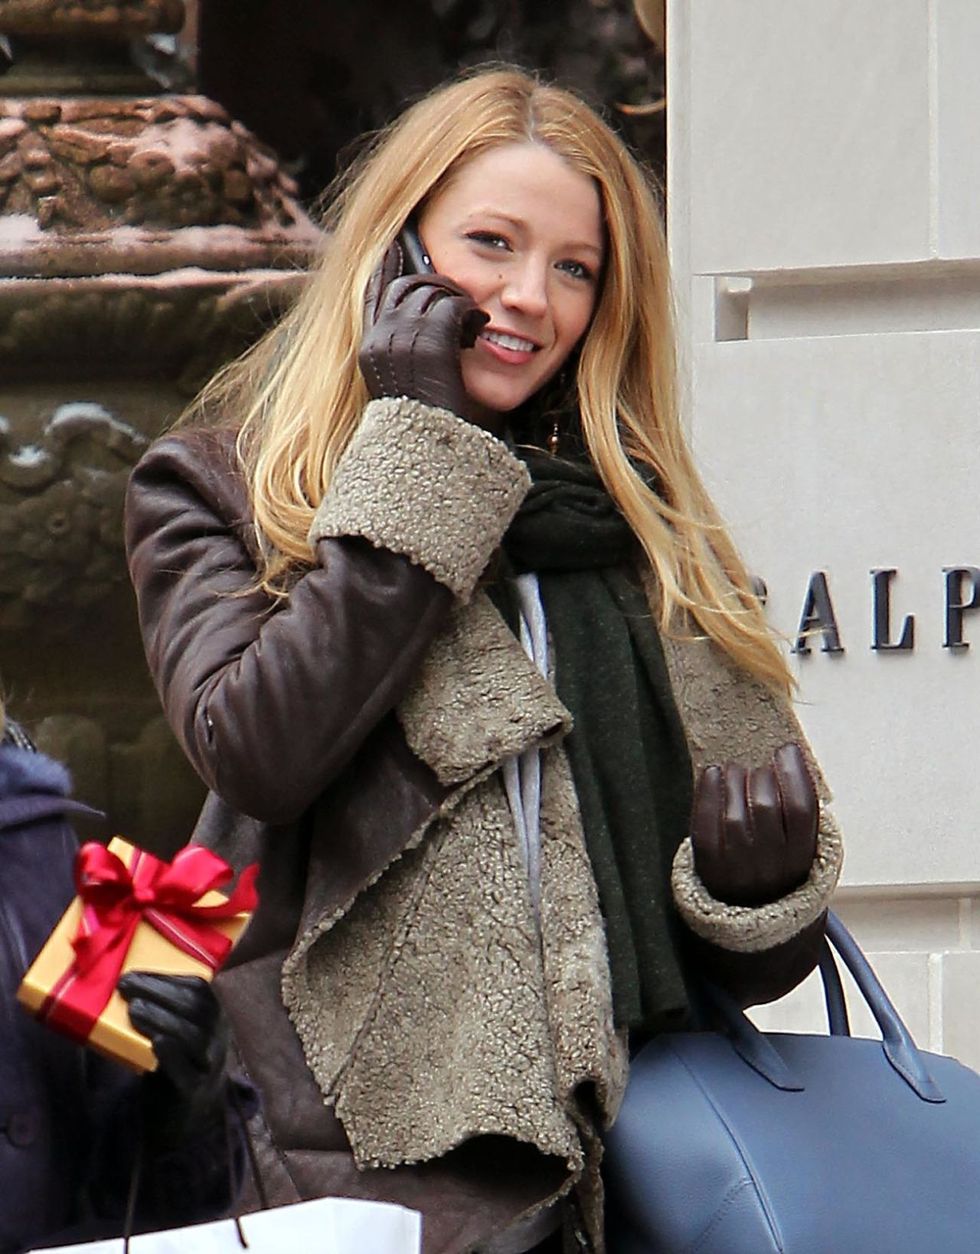 ©2010 RAMEY PHOTO USA, Australia and South Africa Rights only Actress Blake Lively filming scenes for an upcoming episode of the TV series "Gossip Girl" outside the Ralph Lauren store on the Upper East Side in New York, NY on December 13, 2010. CG (Photo by Philip Ramey/Corbis via Getty Images)